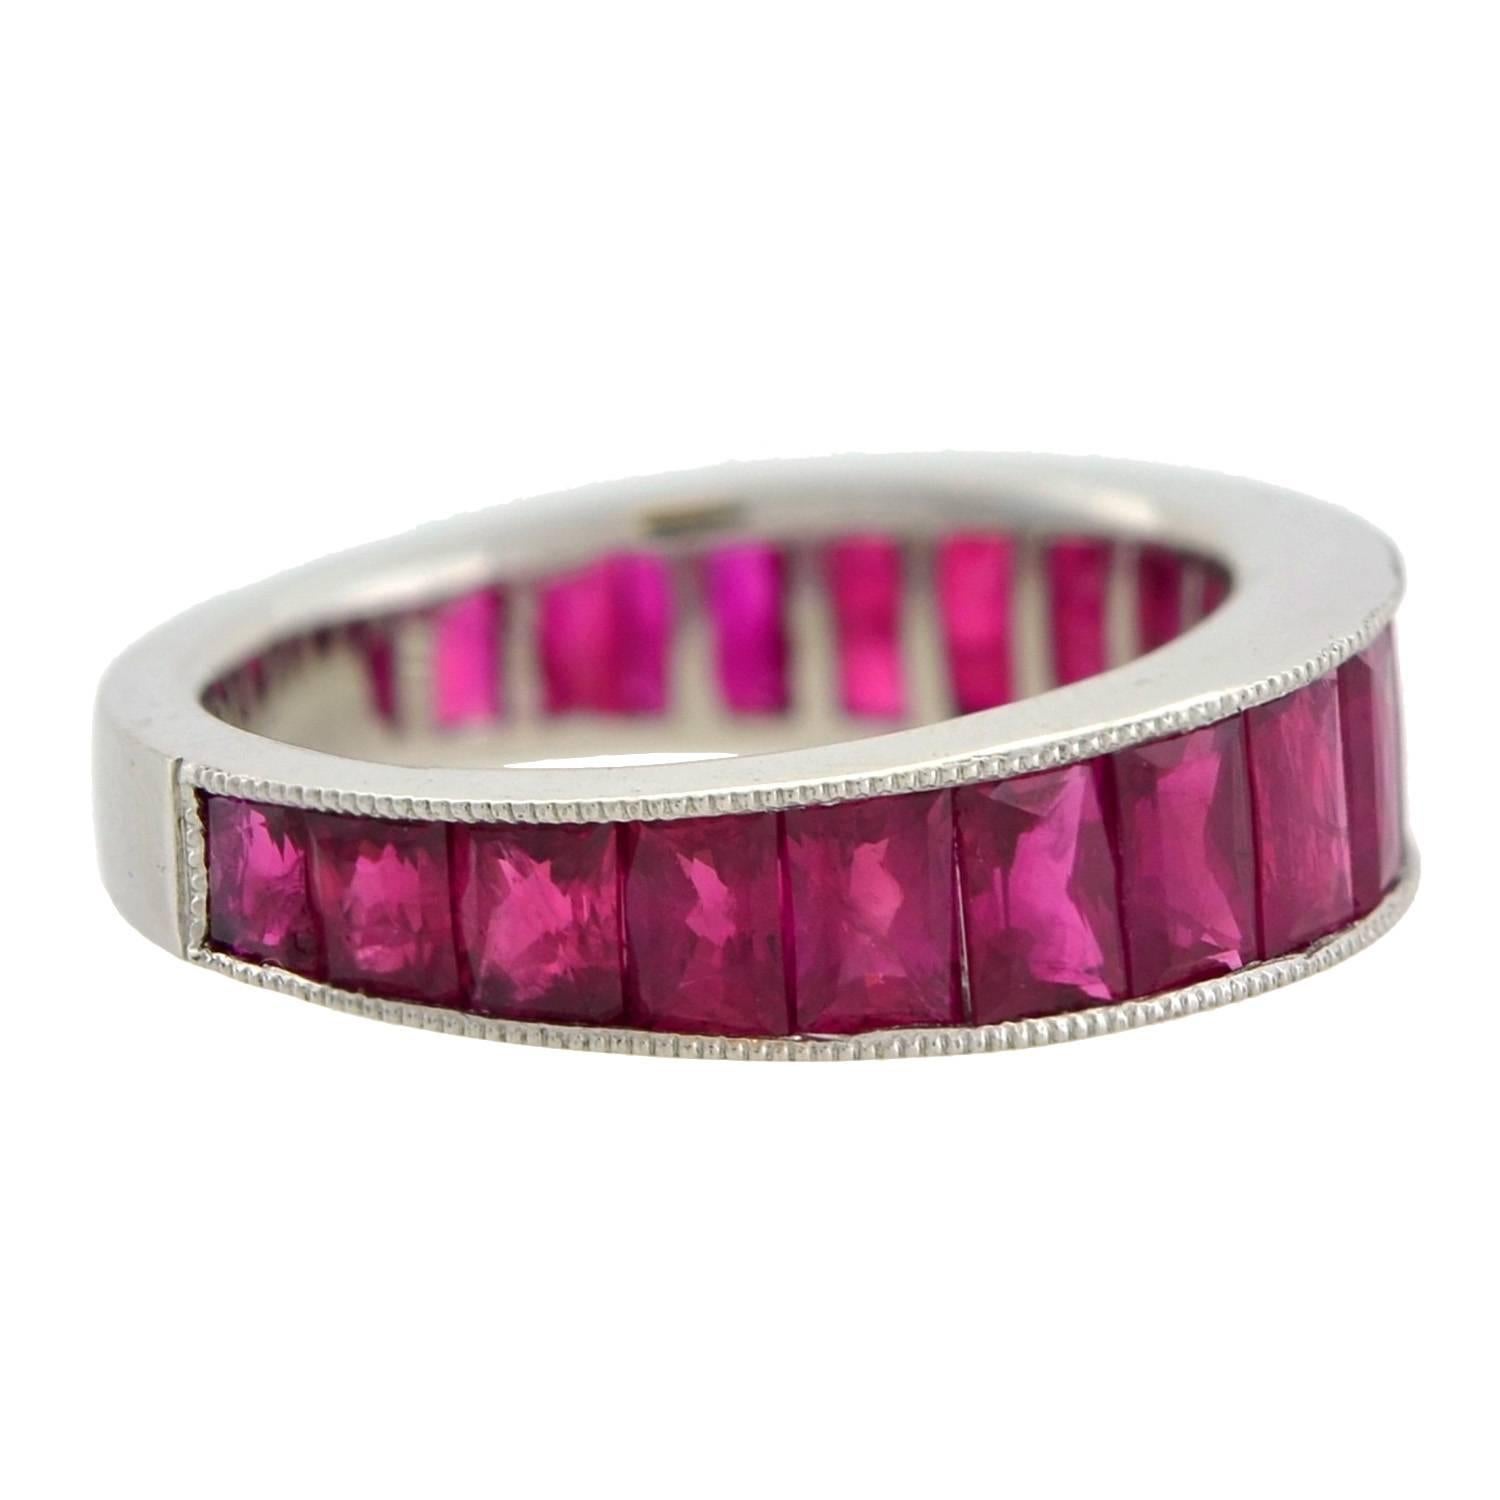 This fantastic ruby eternity band has a stunningly substantial look and feel! Made of platinum, the wide band holds a seamless row of 19 luscious Burmese rubies in a smooth channel setting. The calibrated rubies are French cut stones and graduate in